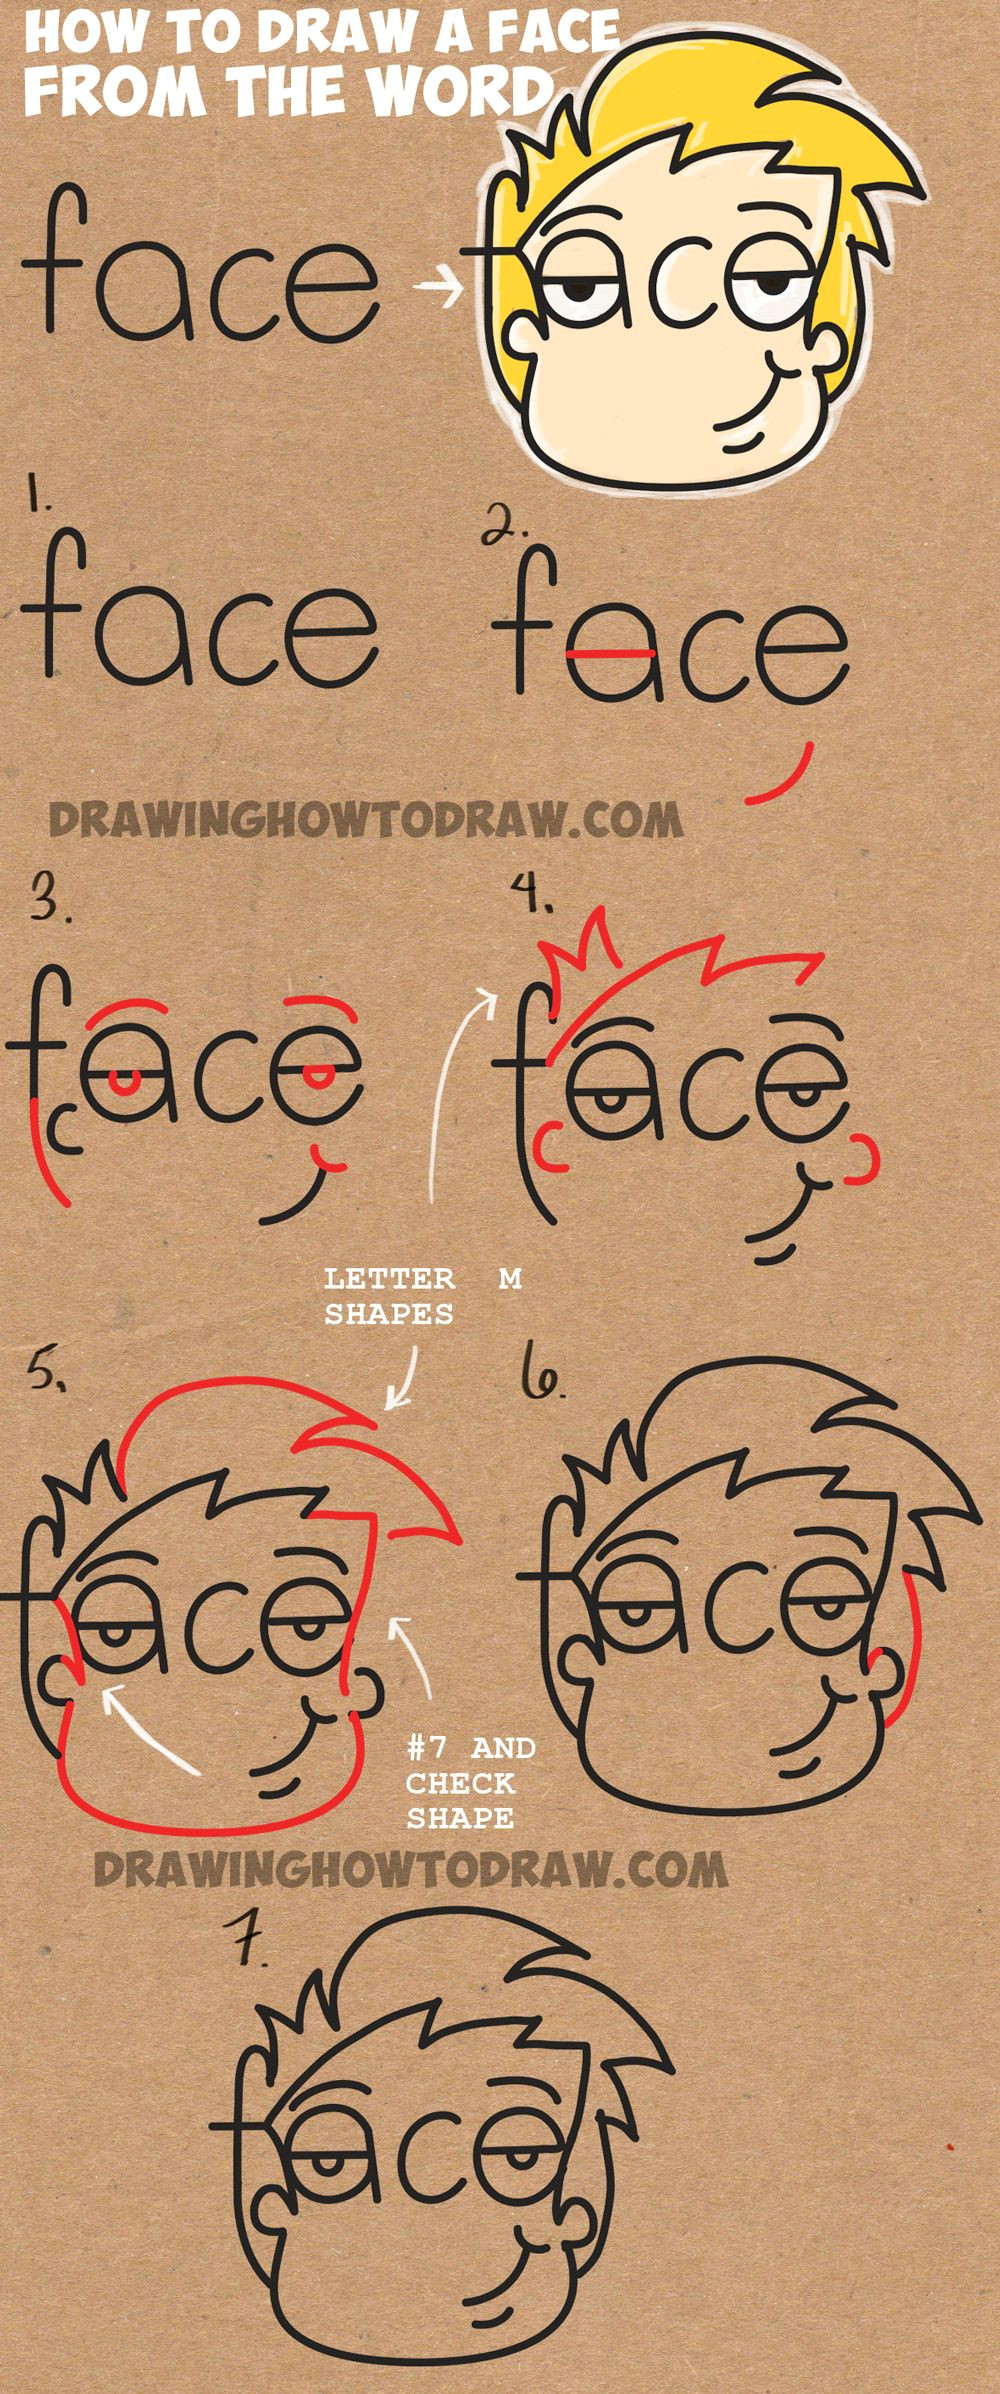 learn how to draw cartoon faces from the word face simple steps drawing lesson for kids